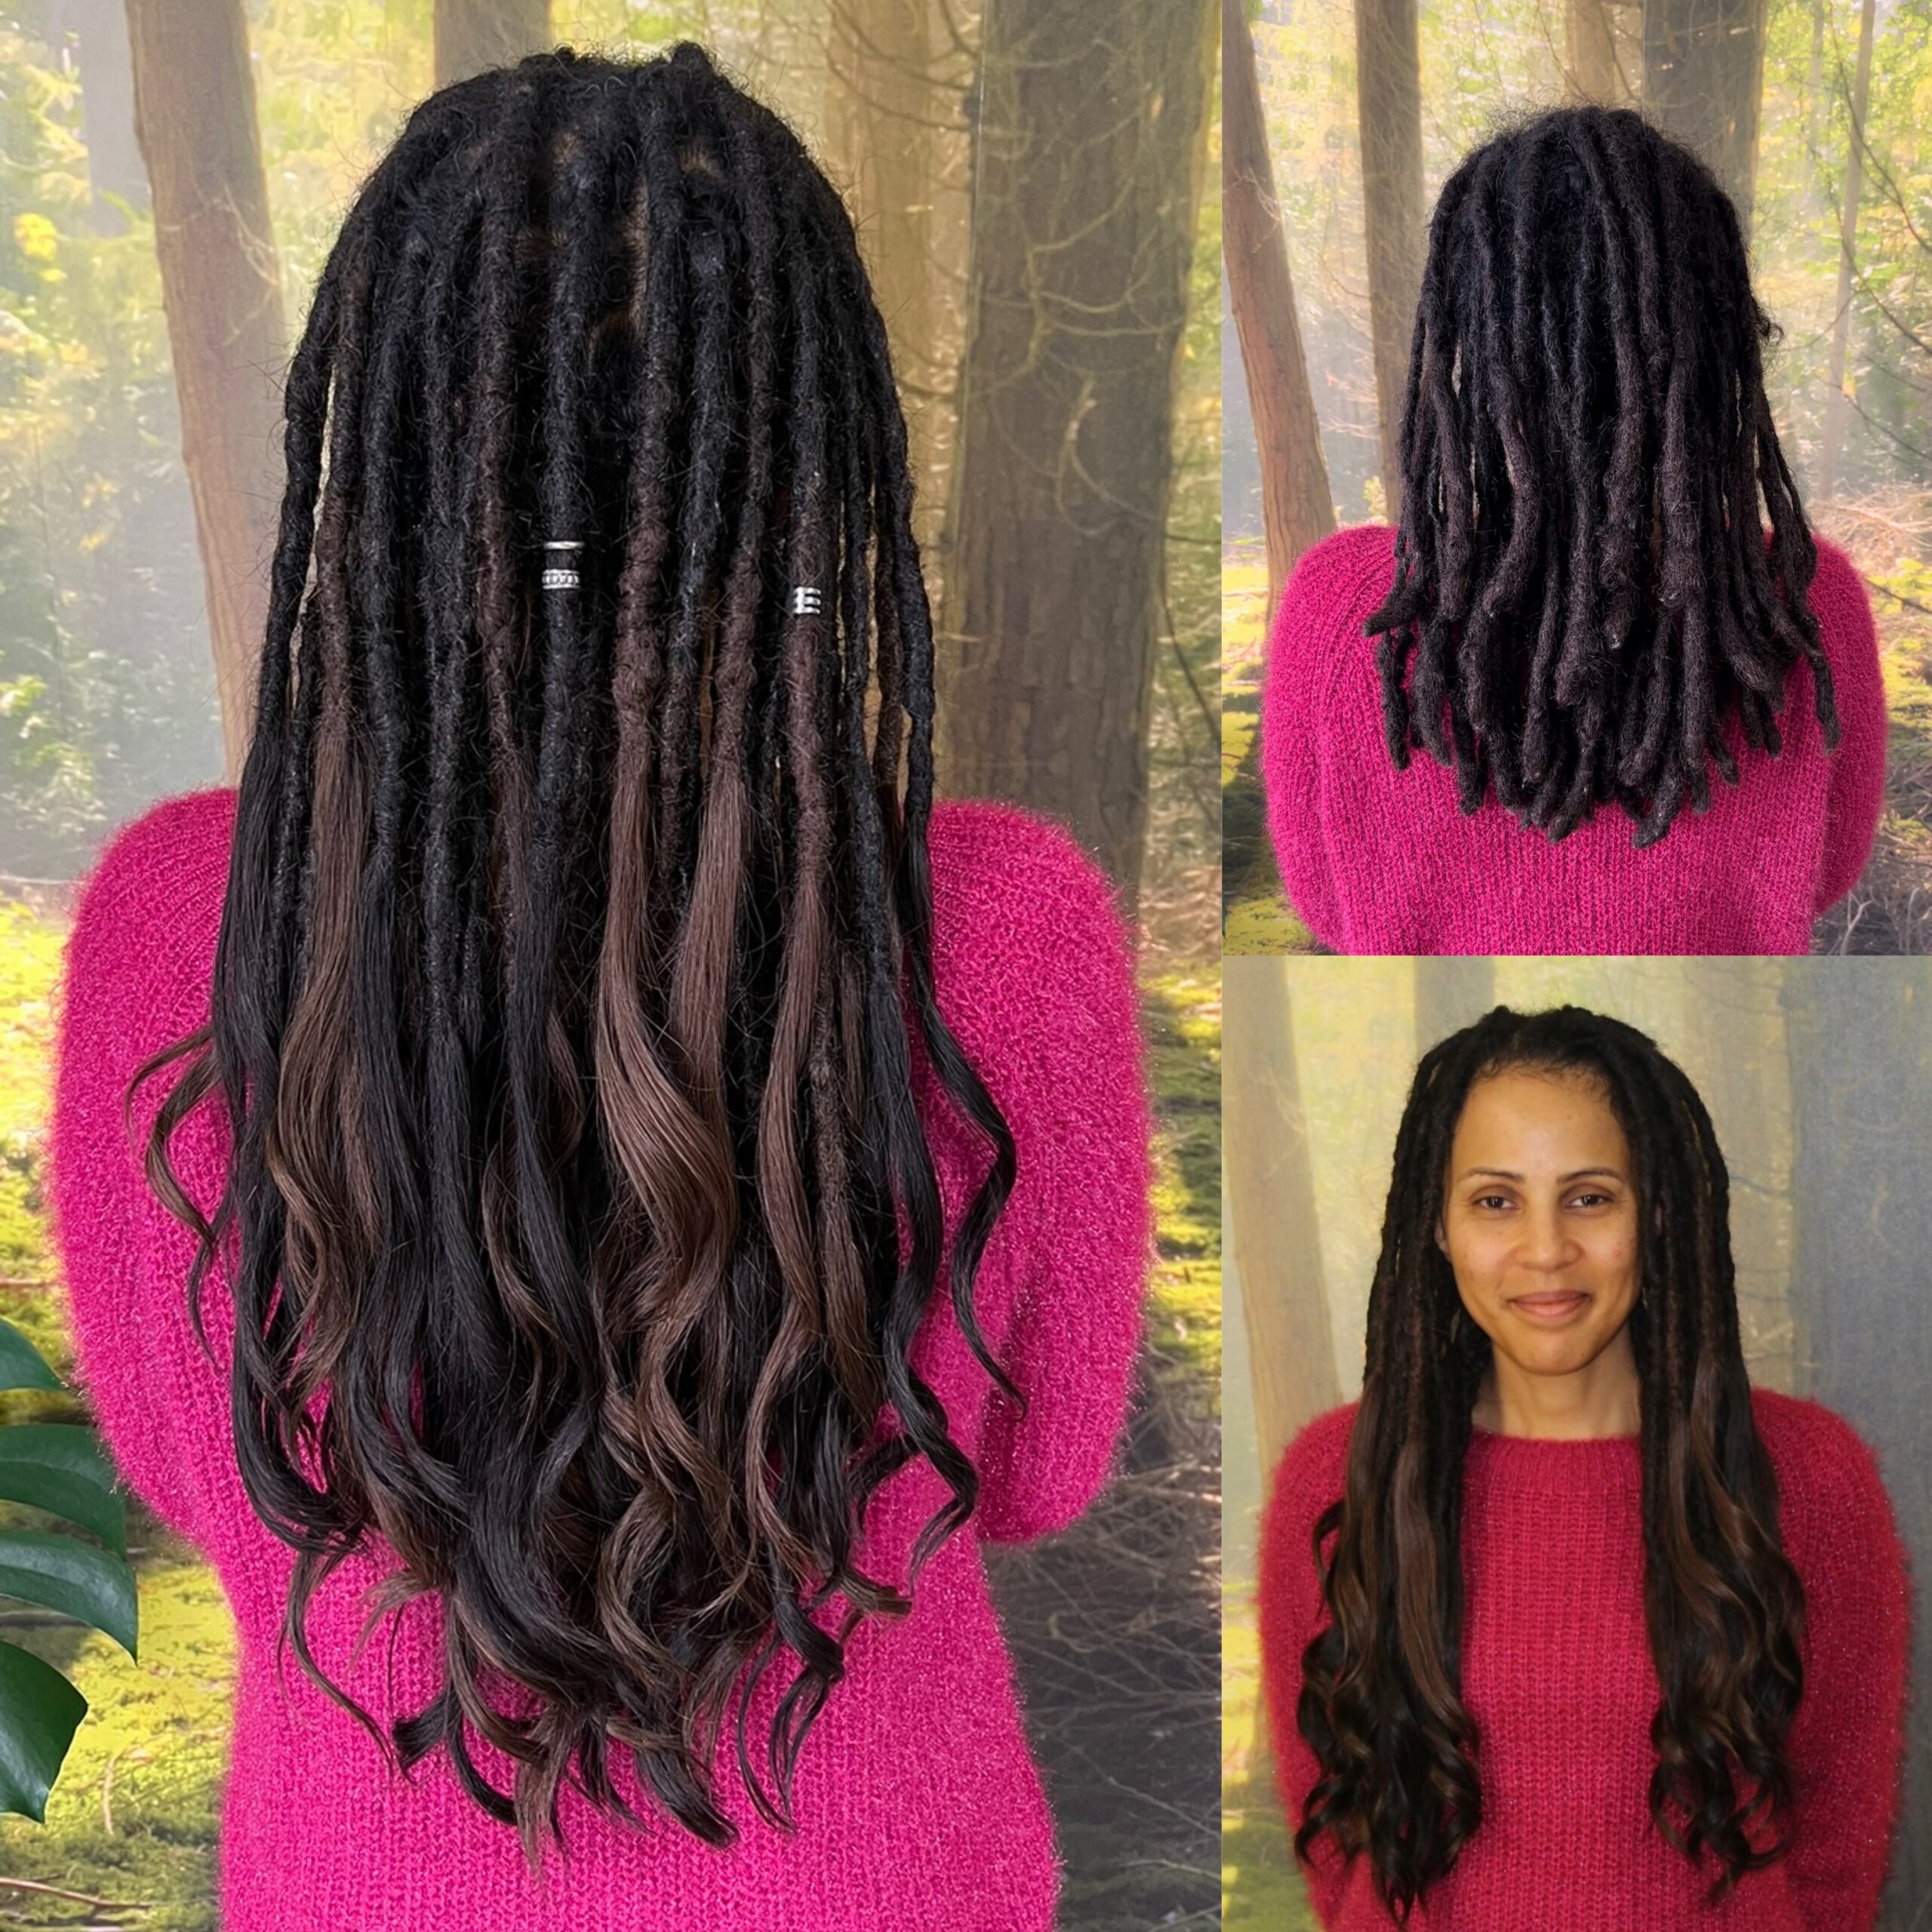 Maintenance of dreads afro hair : Beautification of the brush tips